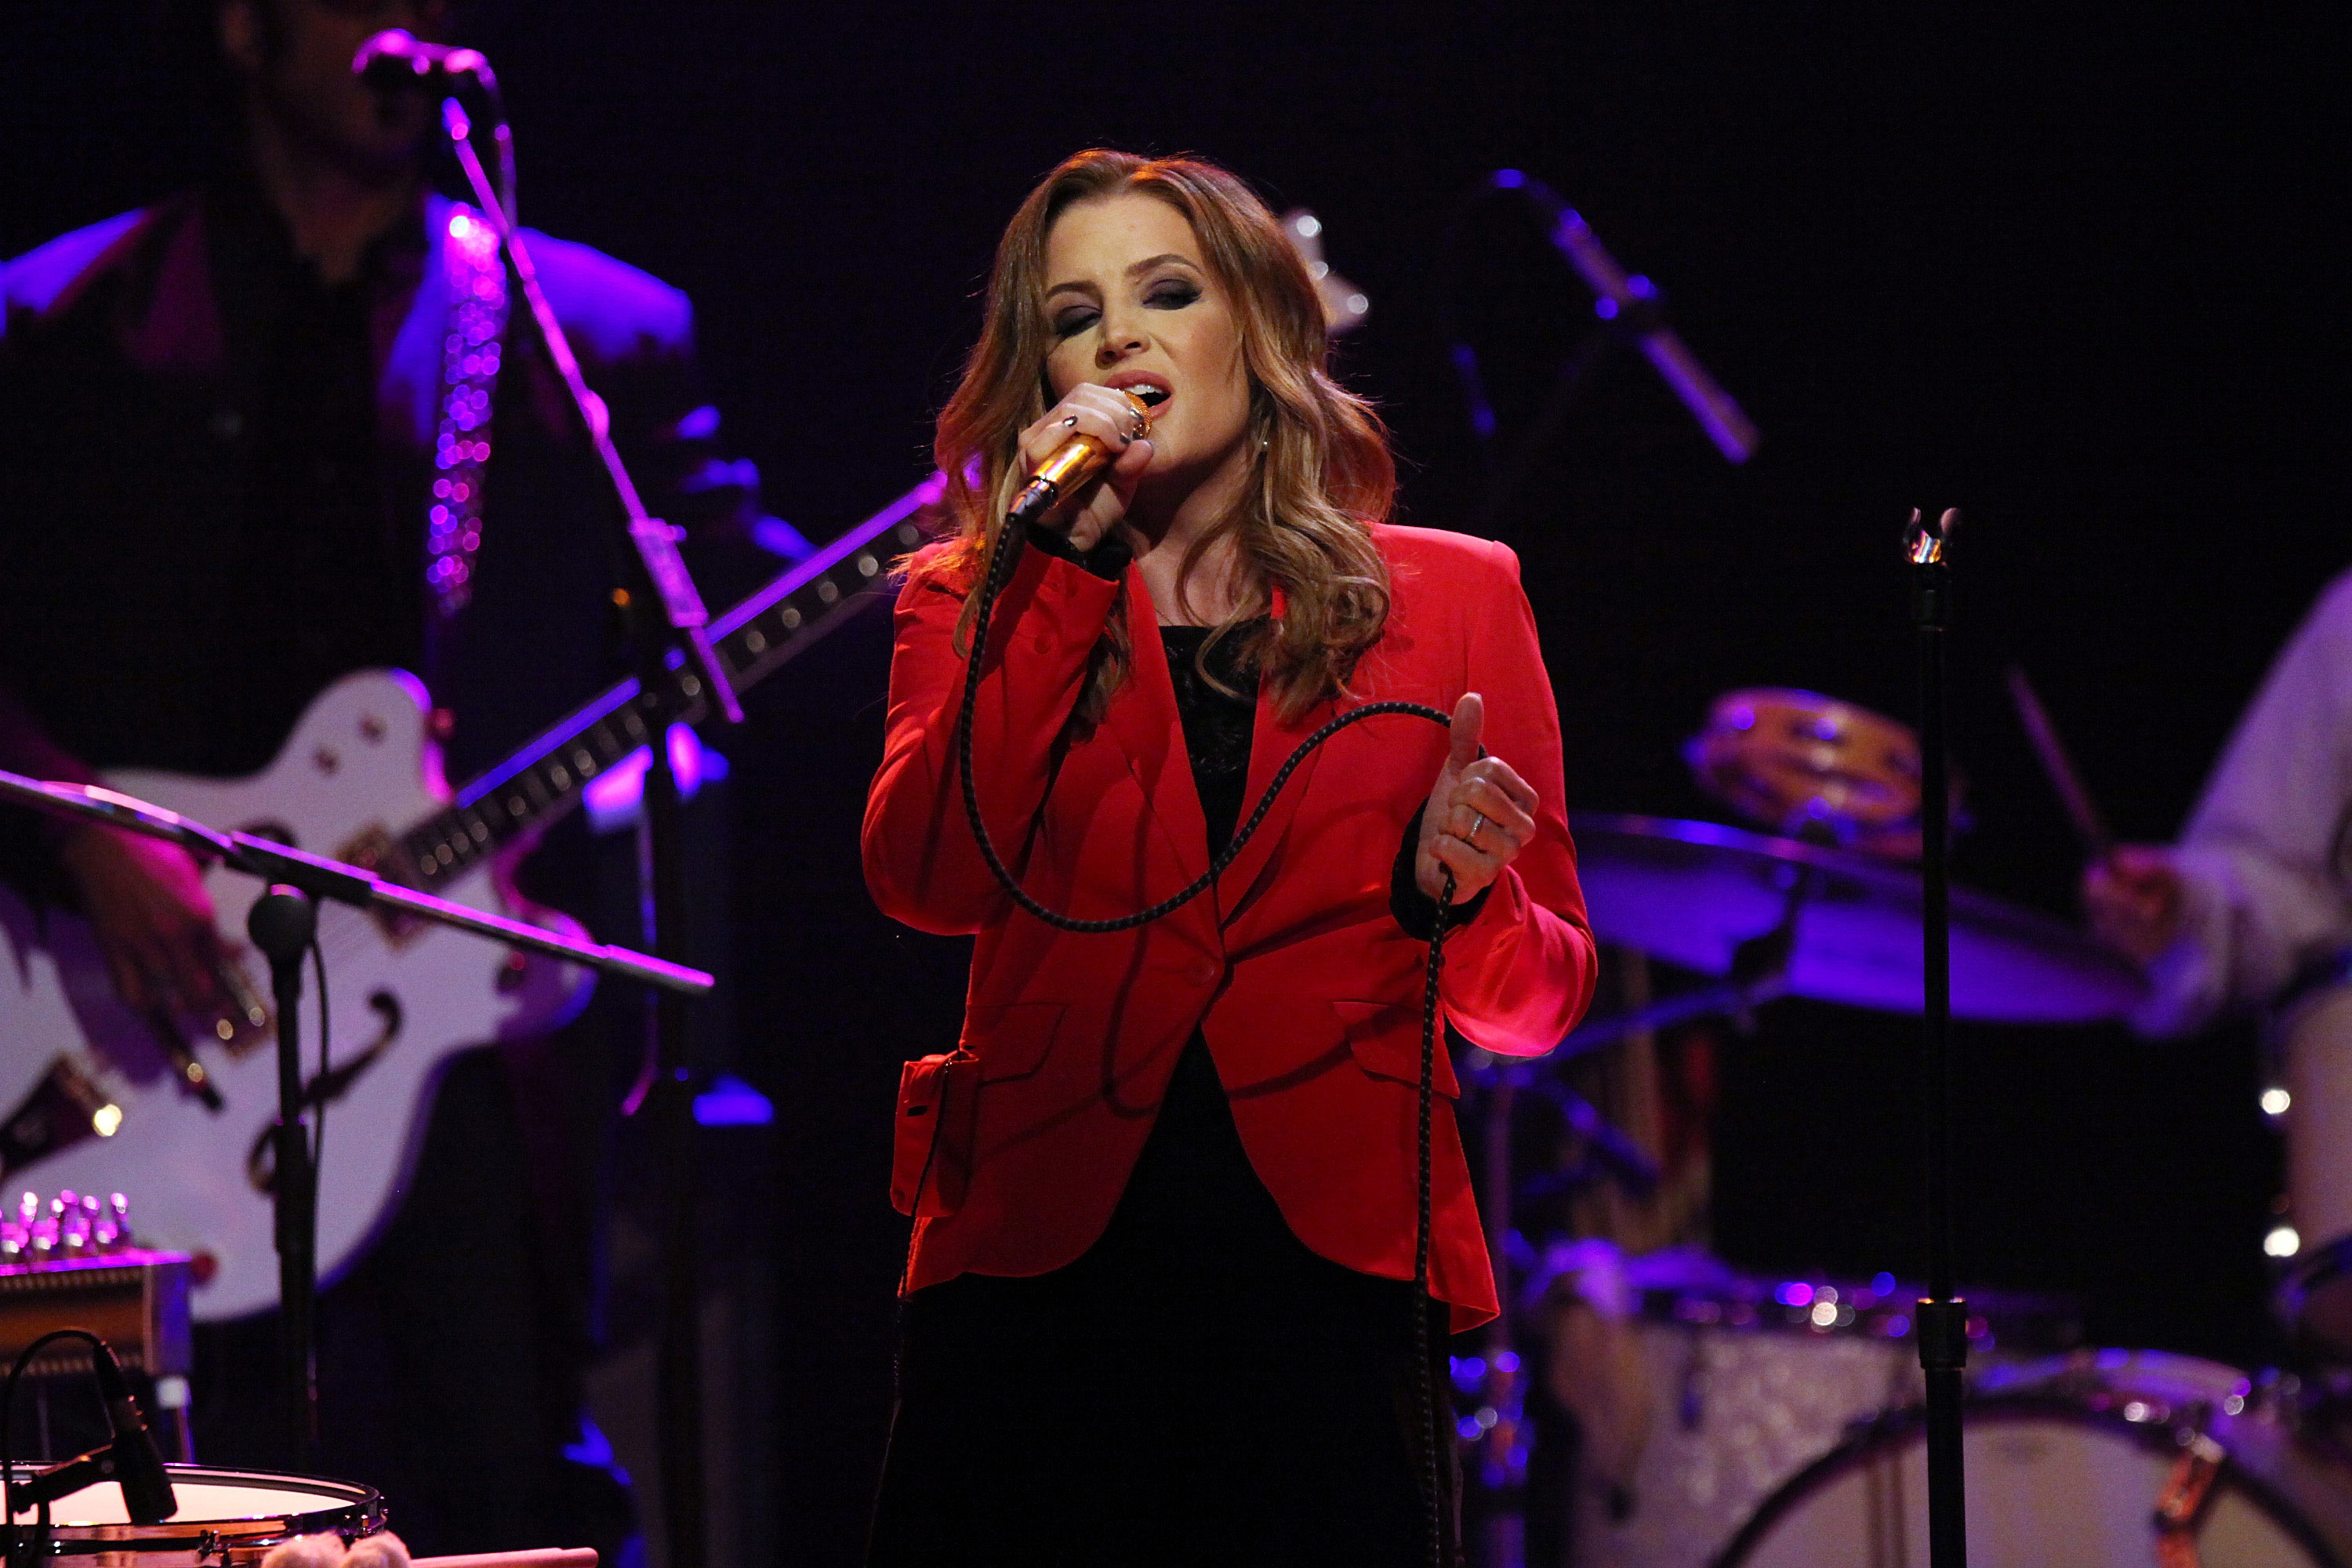 Lisa Marie Presley performs onstage at Gramercy Theatre on June 14, 2012 in New York City.